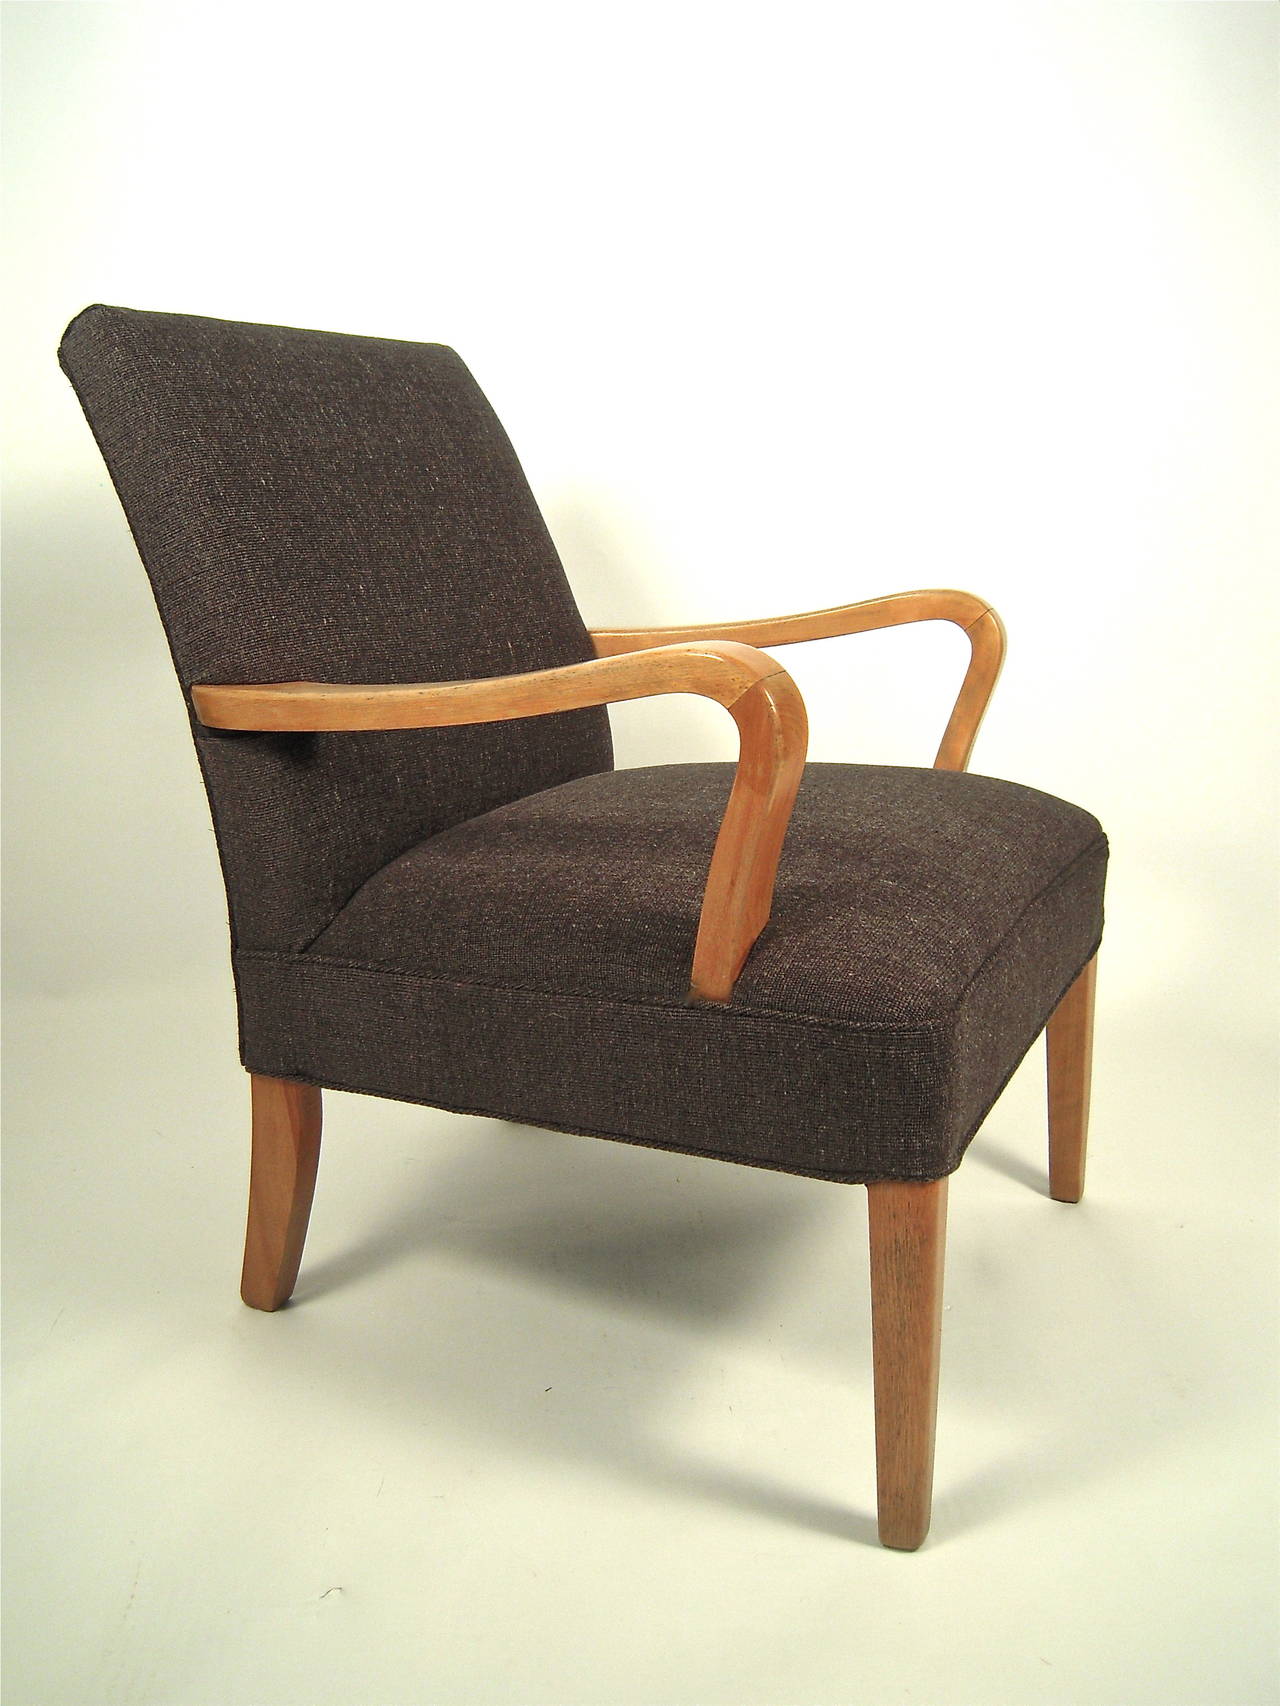 A very comfortable, well made American Mid-Century Modern bentwood upholstered armchair, the sculptural arms in curved maple or birch, the seat and back newly reupholstered in high quality charcoal grey linen and wool, raised on four square section